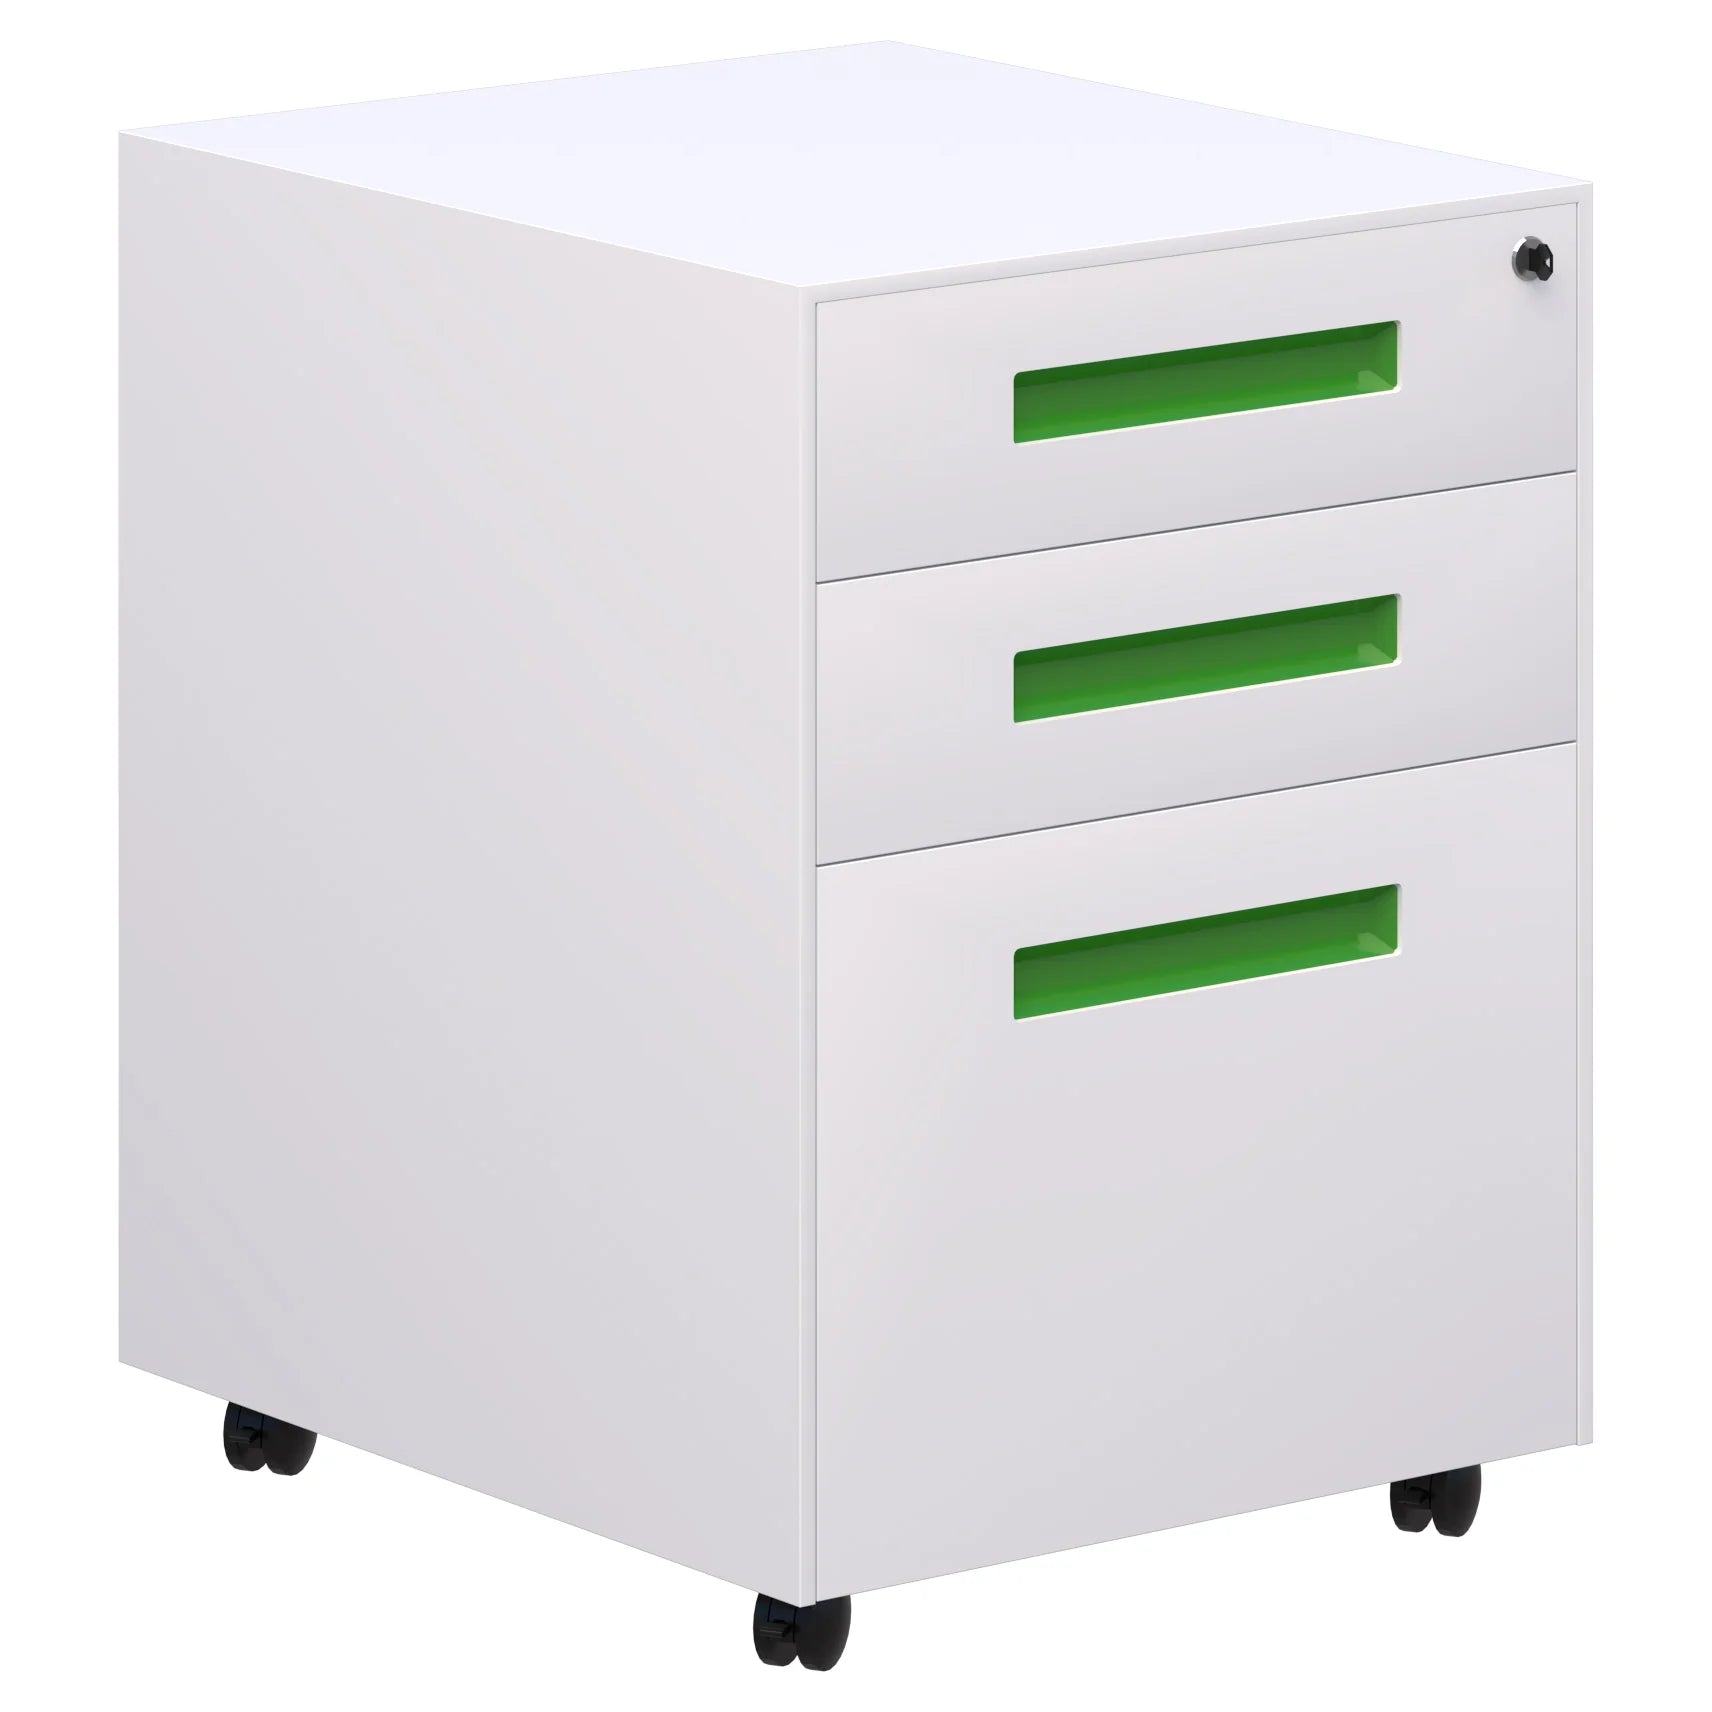 Lockable Spectrum metal mobile with two stationery drawers and 1 file draw in white with green handles.